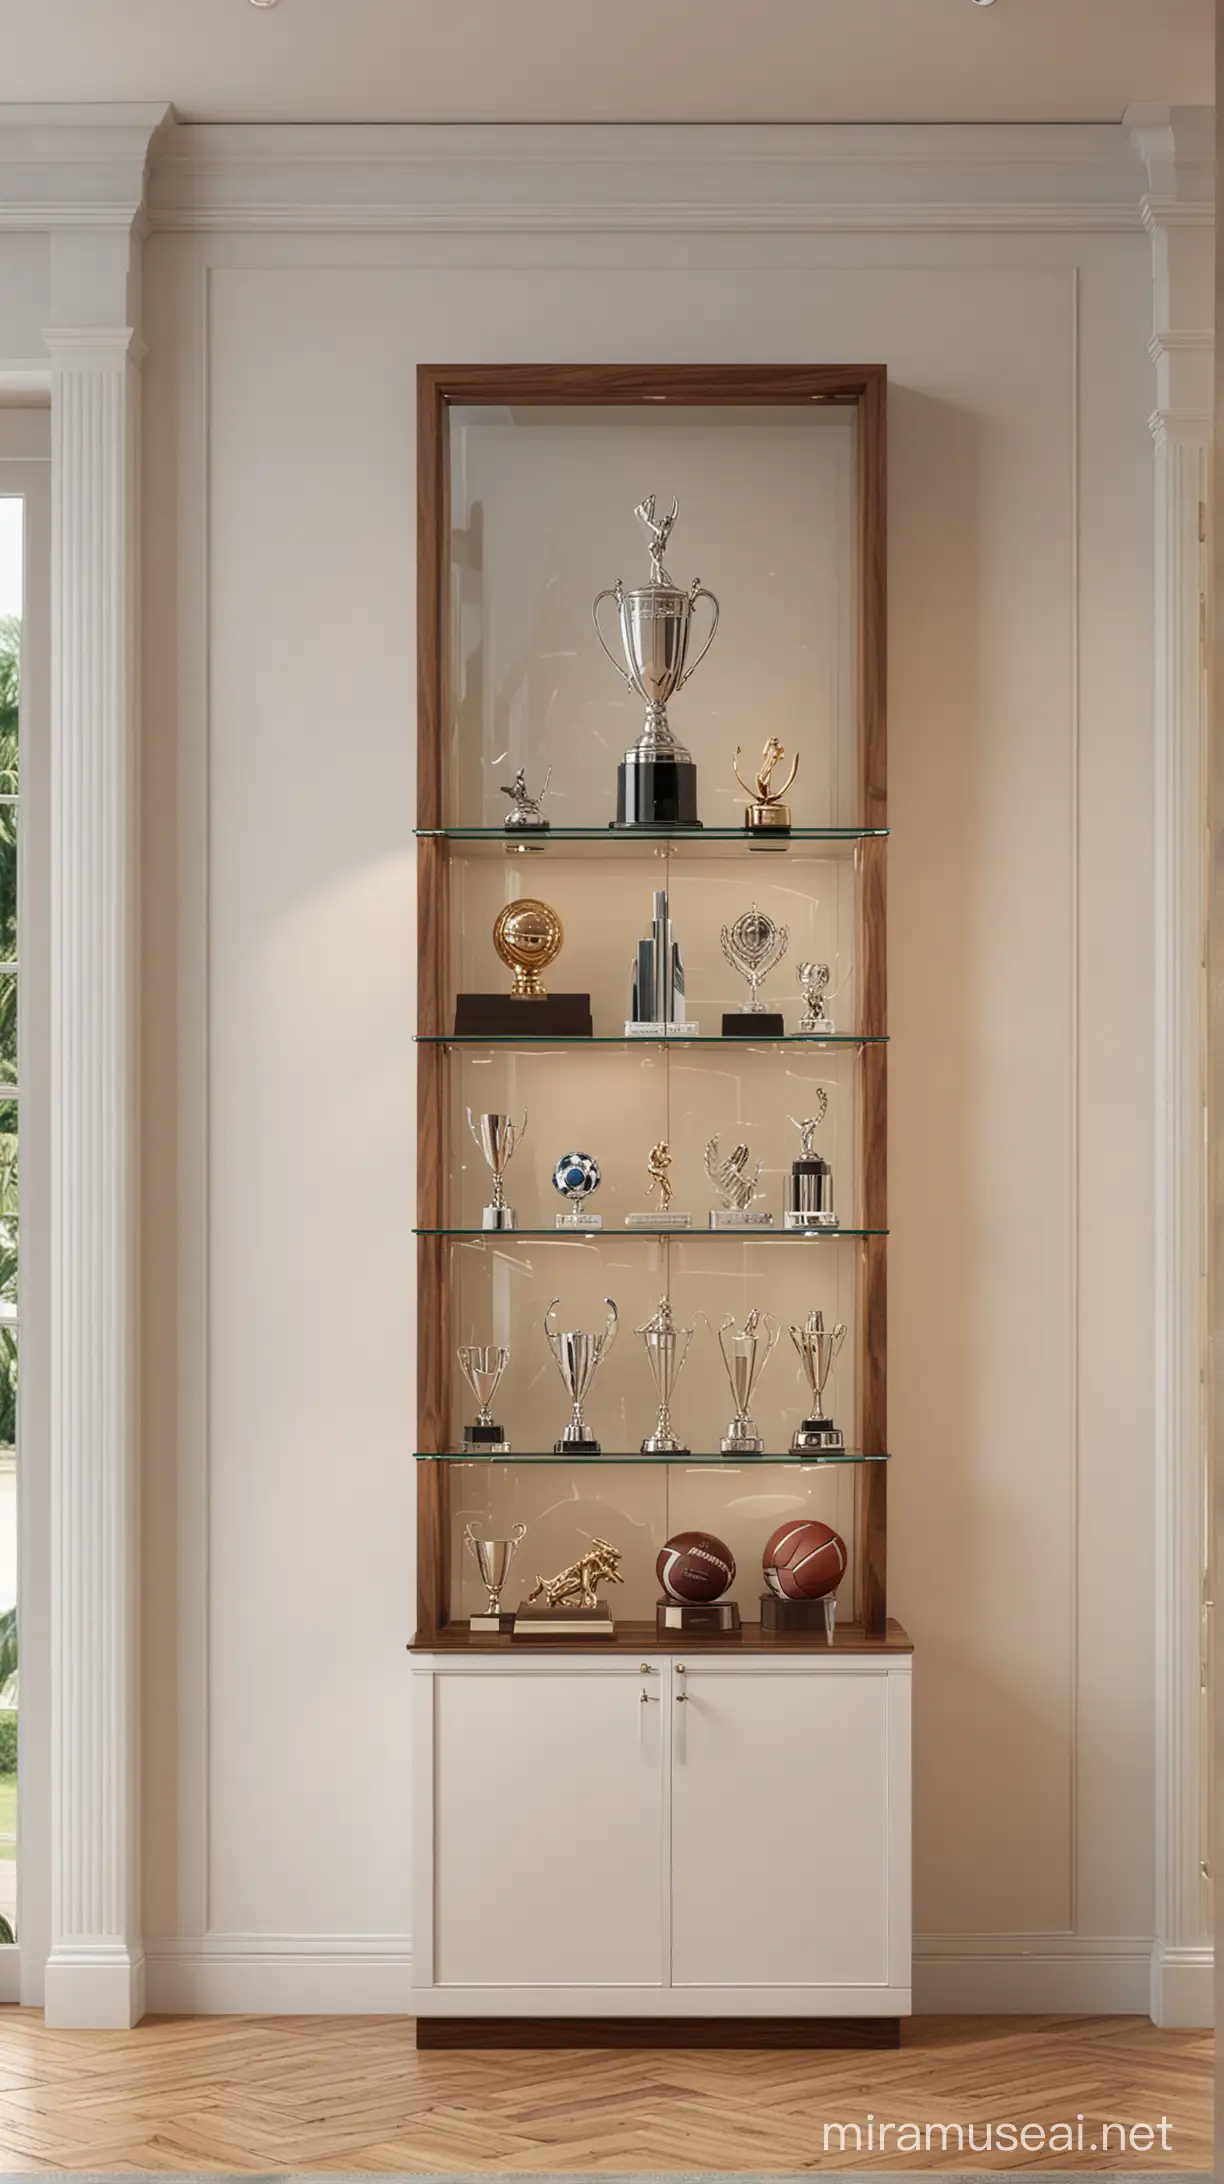 create a photorealistic image of the backdrop of Sports Trophy Room in 2020. The cabinet is made out of glass. 